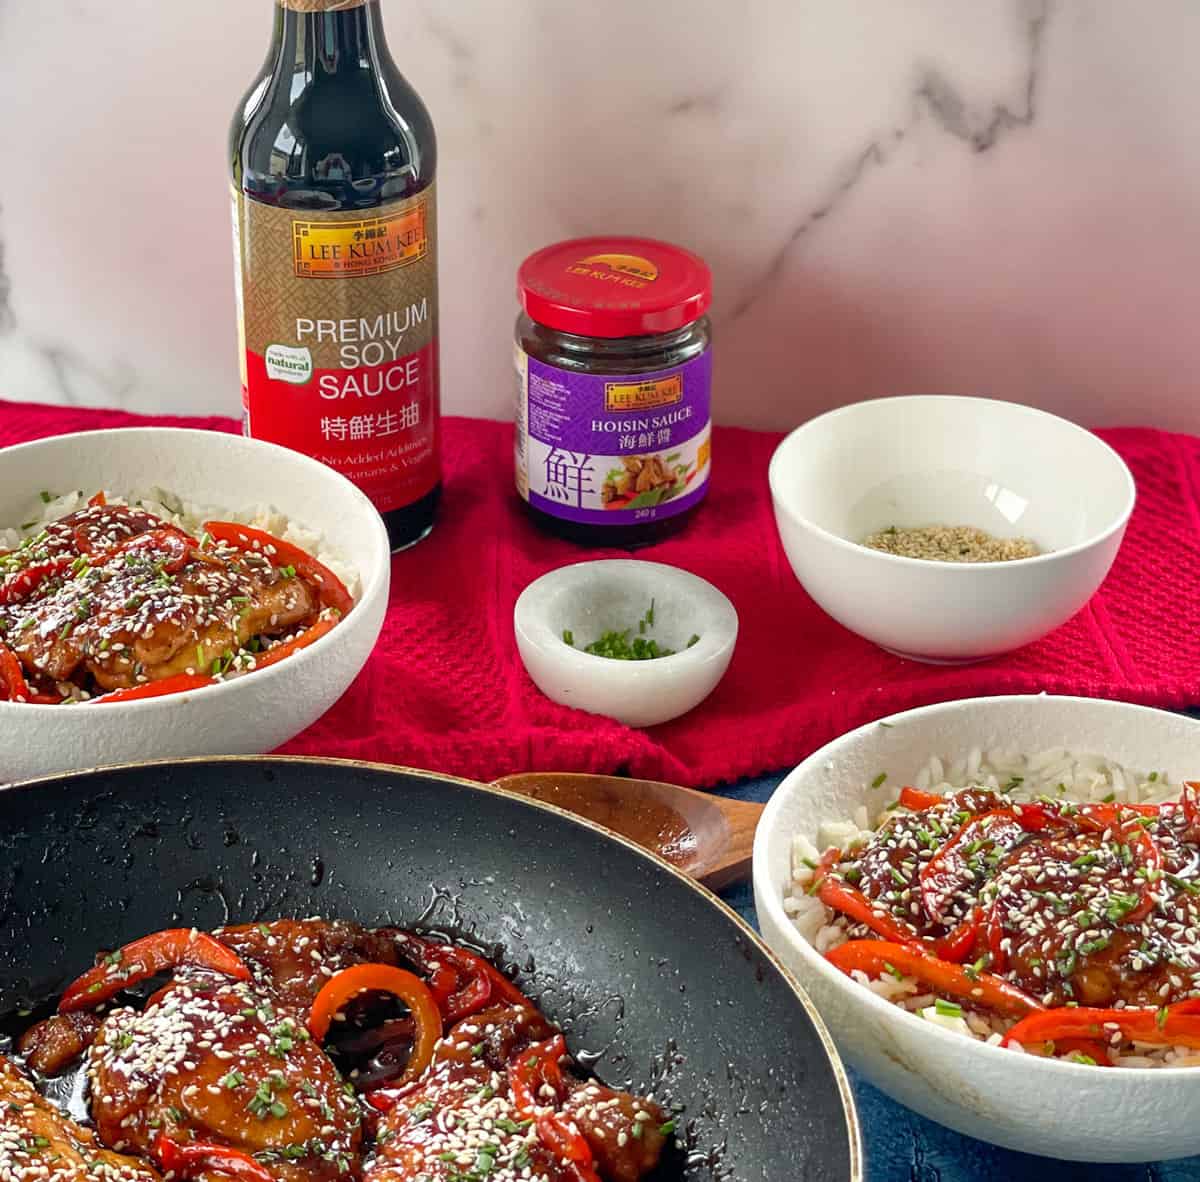 Lee Kum Kee Soy Sauce and Hoisin Sauce used to make a Sticky Asian Chicken